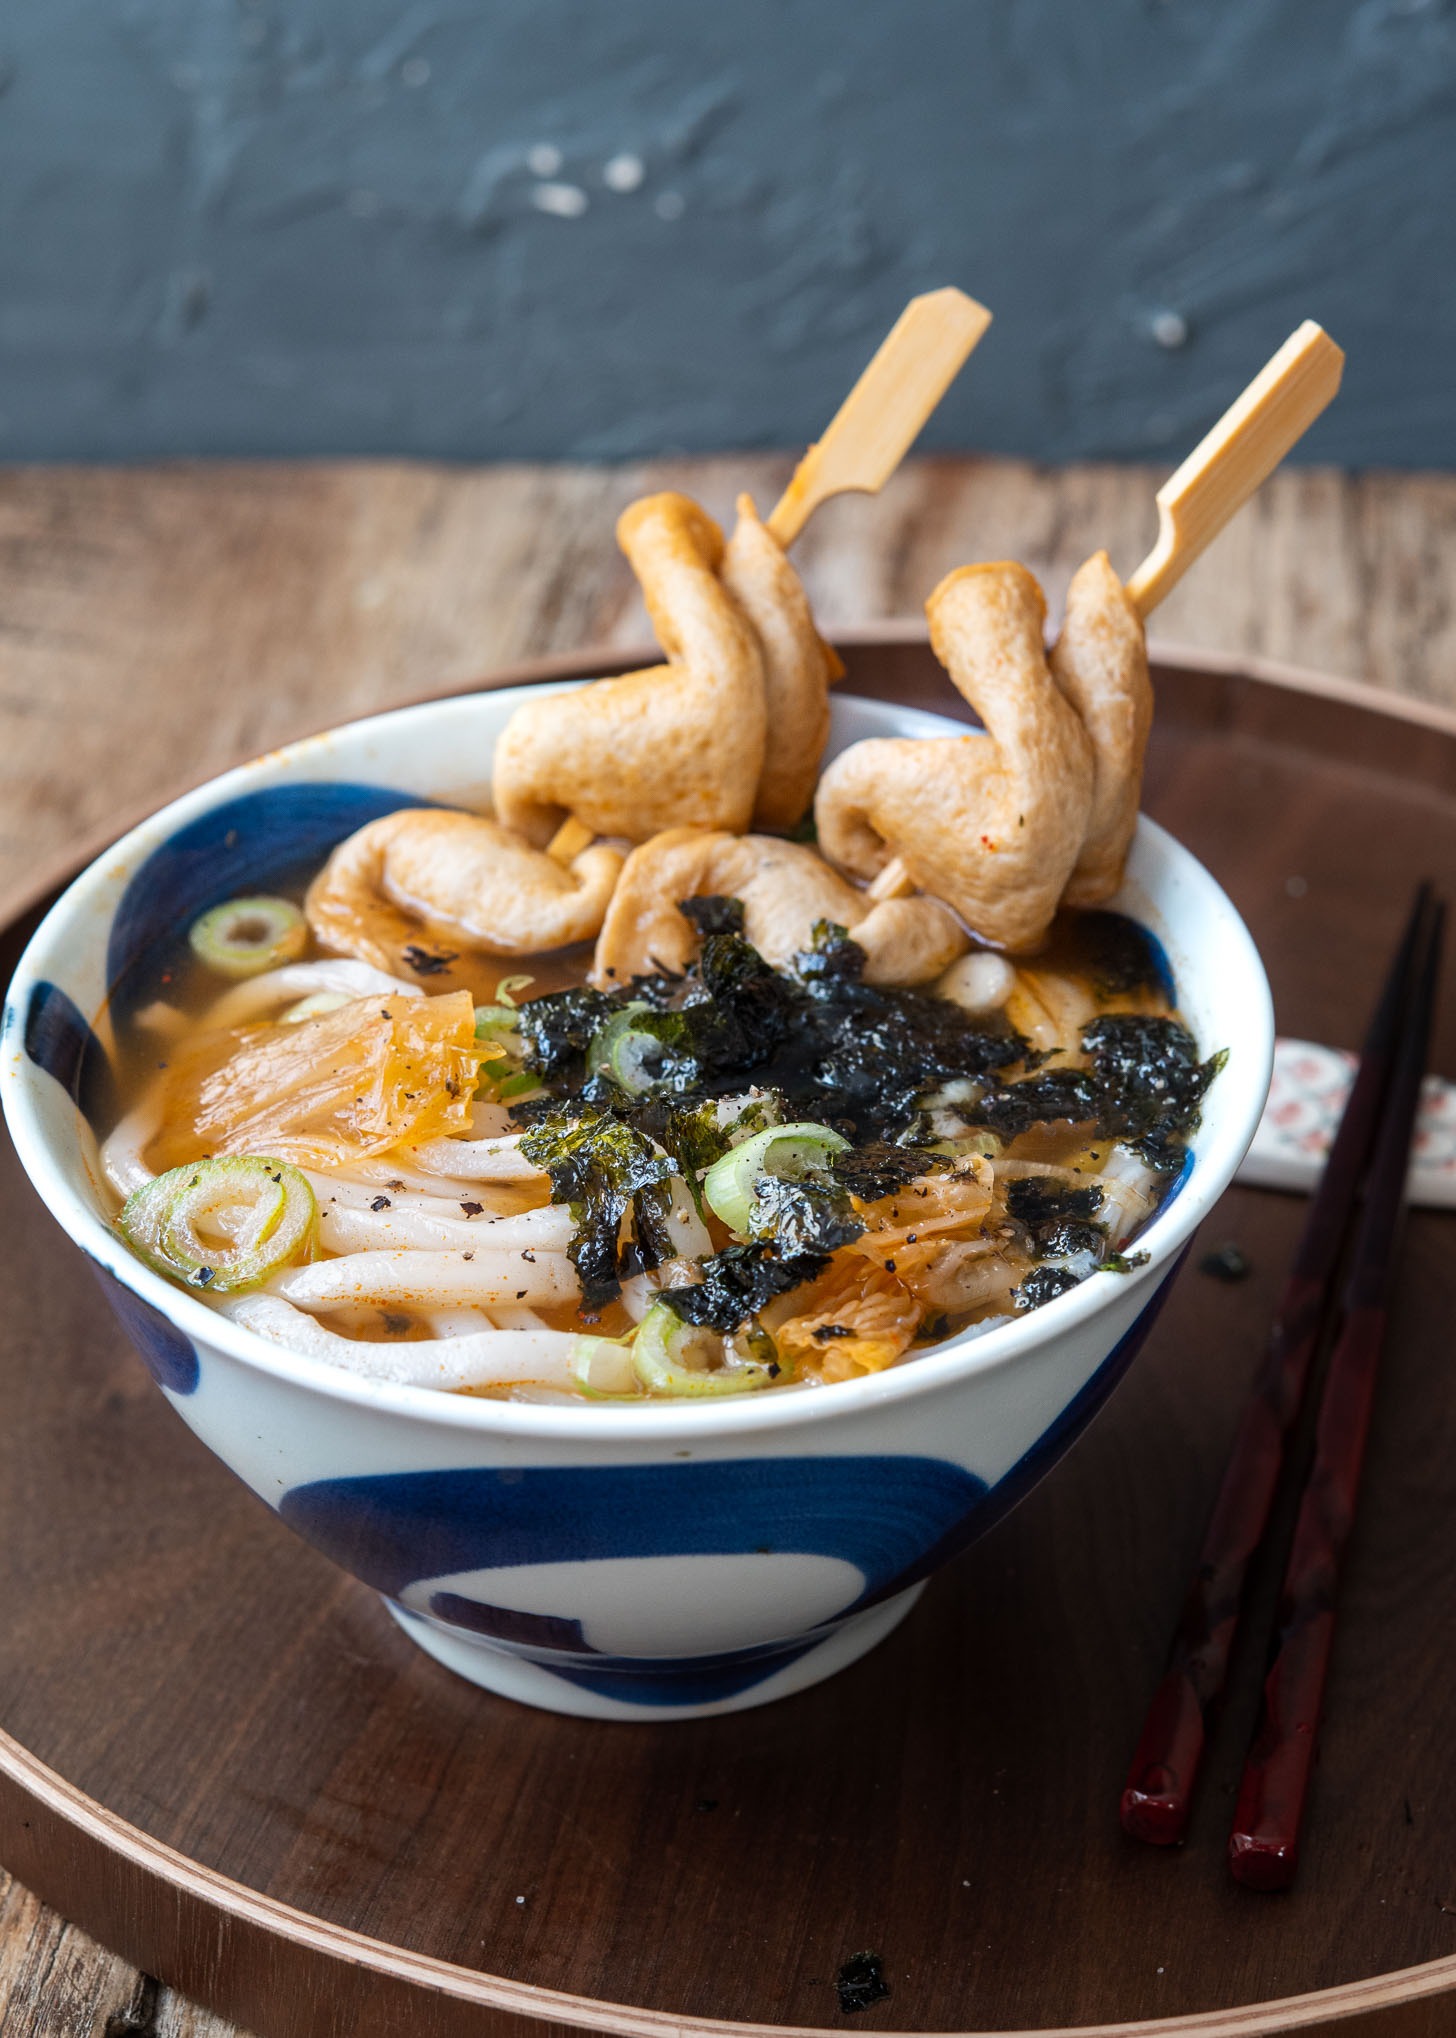 Kimchi udon noodle soup with fish cake skewers in a bowl.